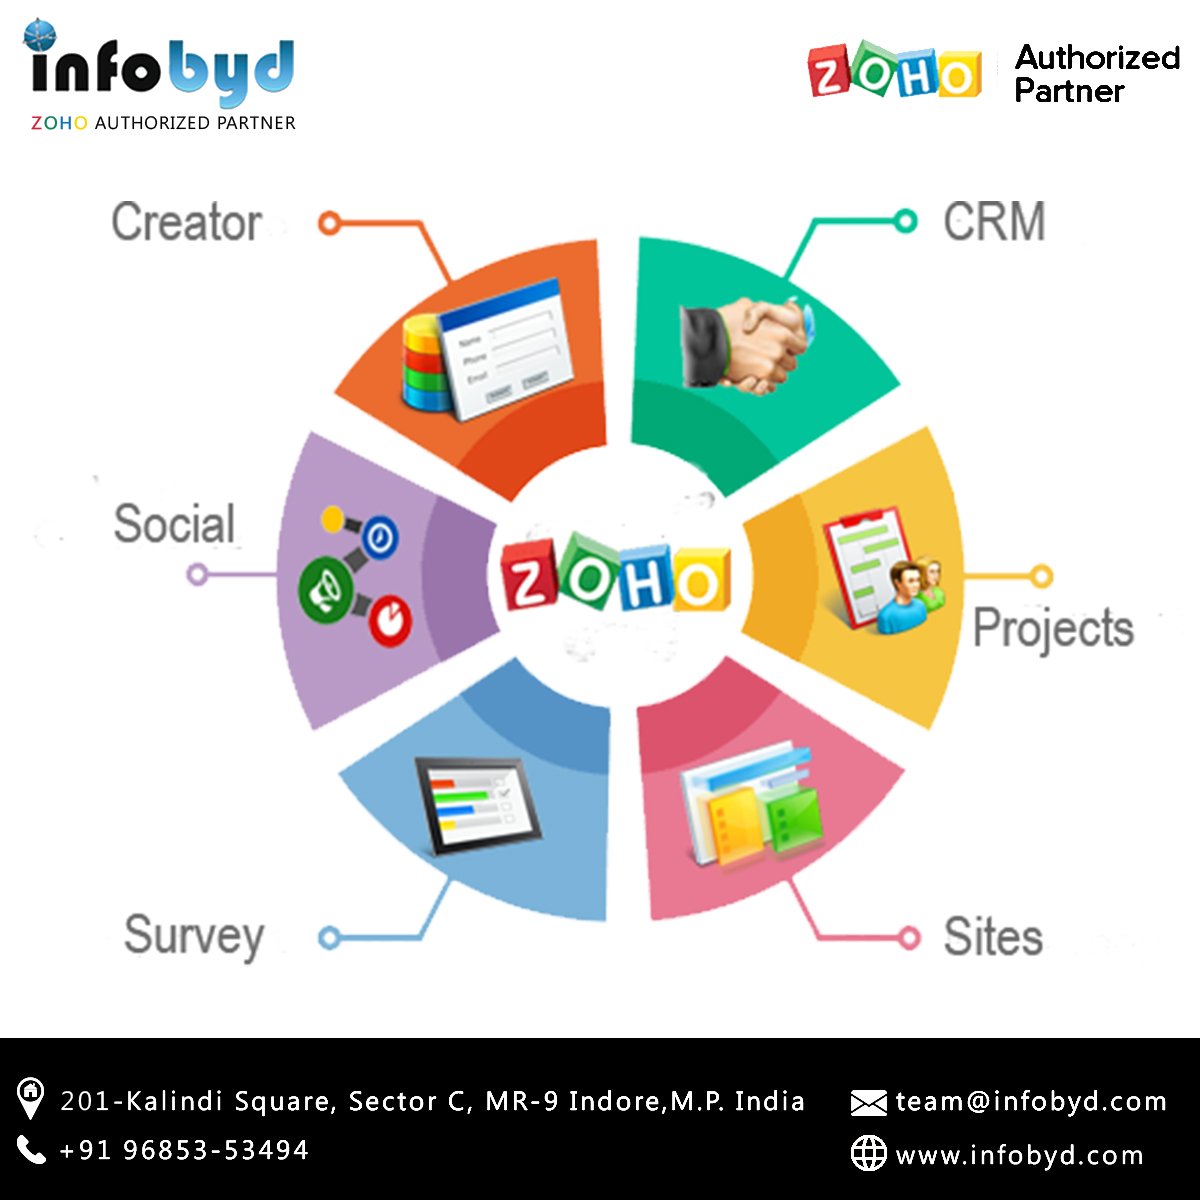 Get complete Zoho services from Infobyd!!For contact visit: http://bit.ly/2...